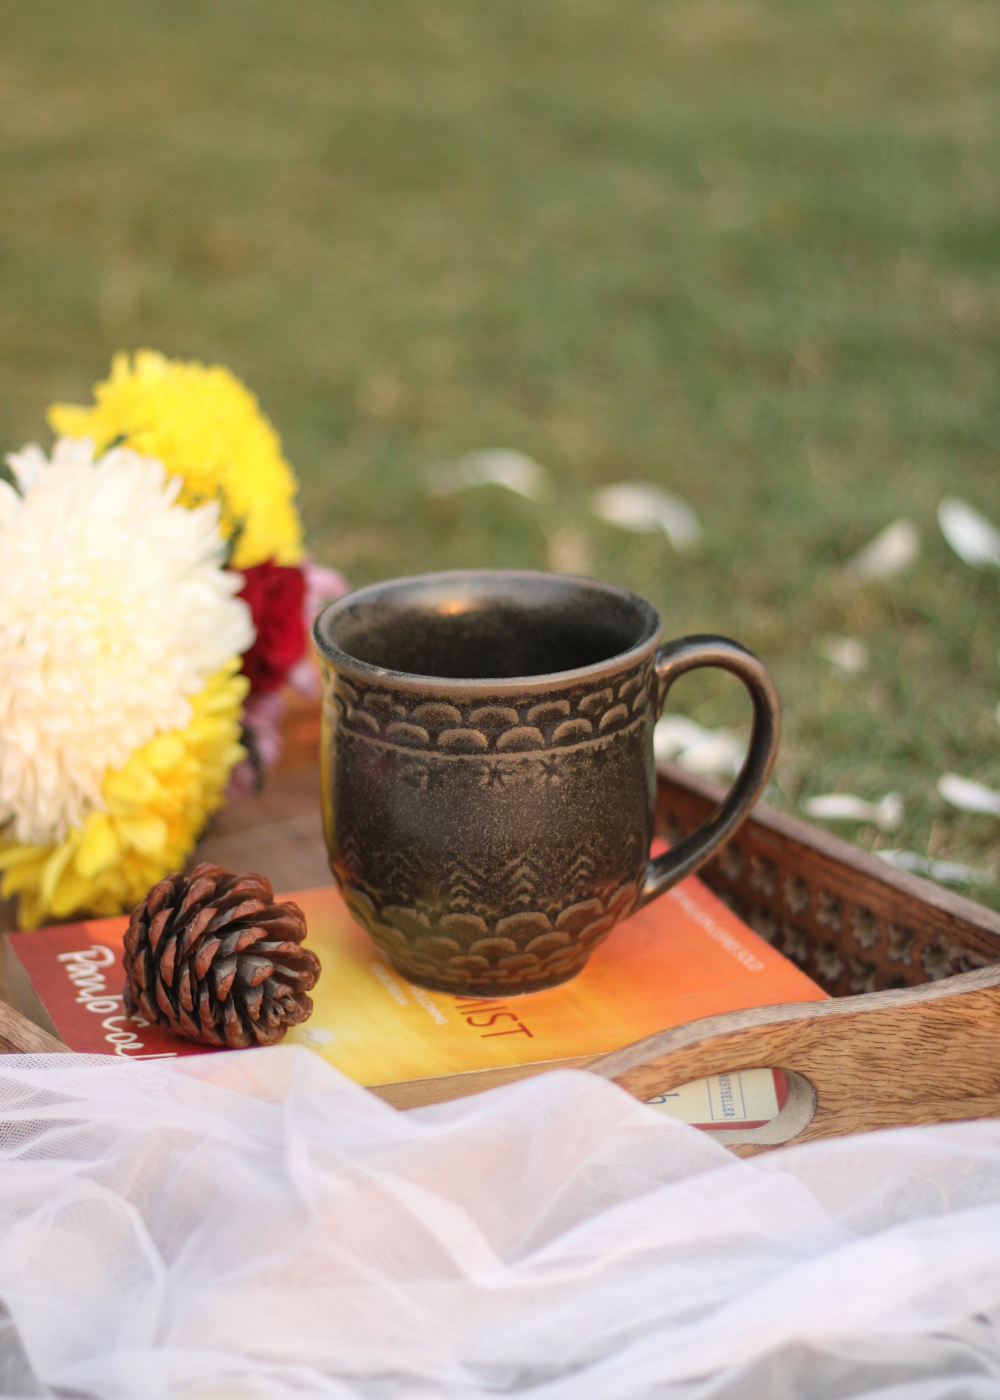 Black coffee mug in a wooden tray with flowers